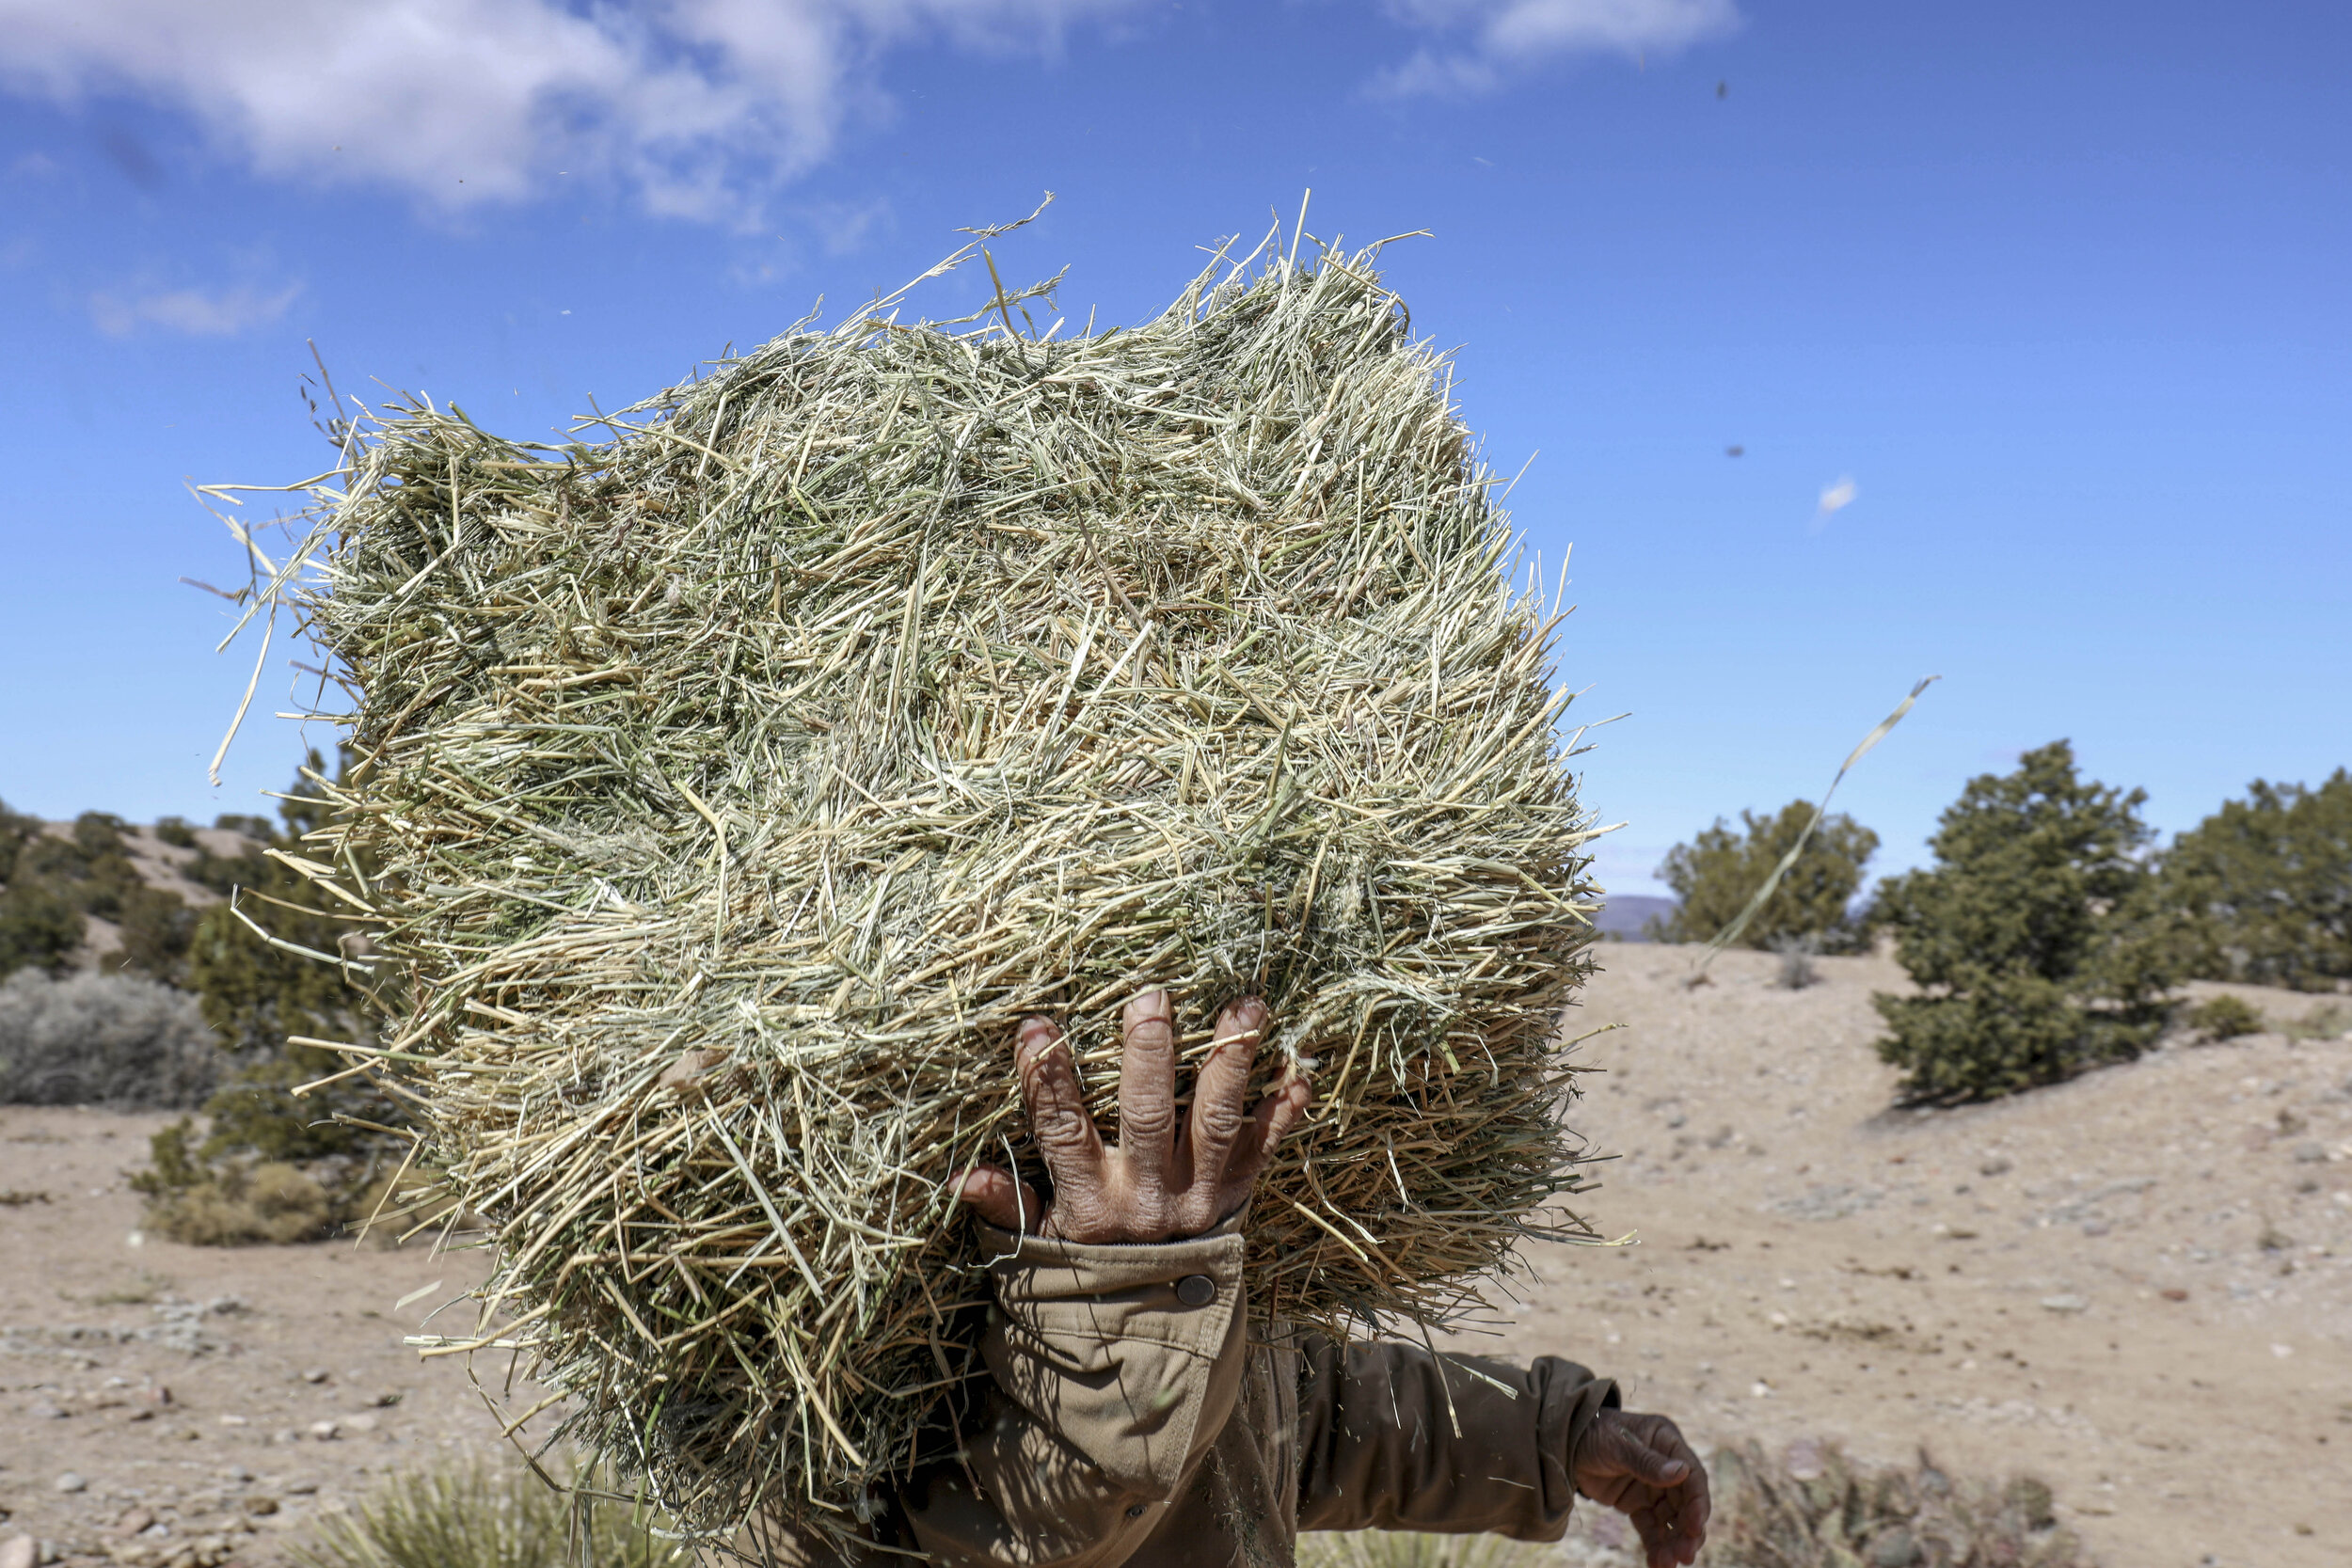  Sosa carries a bale of hay to the horses out in the reservation. To feed all the horses, Placitas Wild purchases 120-150 bales of hay a week to feed the horses. Due to a spike in hay prices in recent years Placitas Wild has spent $1,600 a week on ha